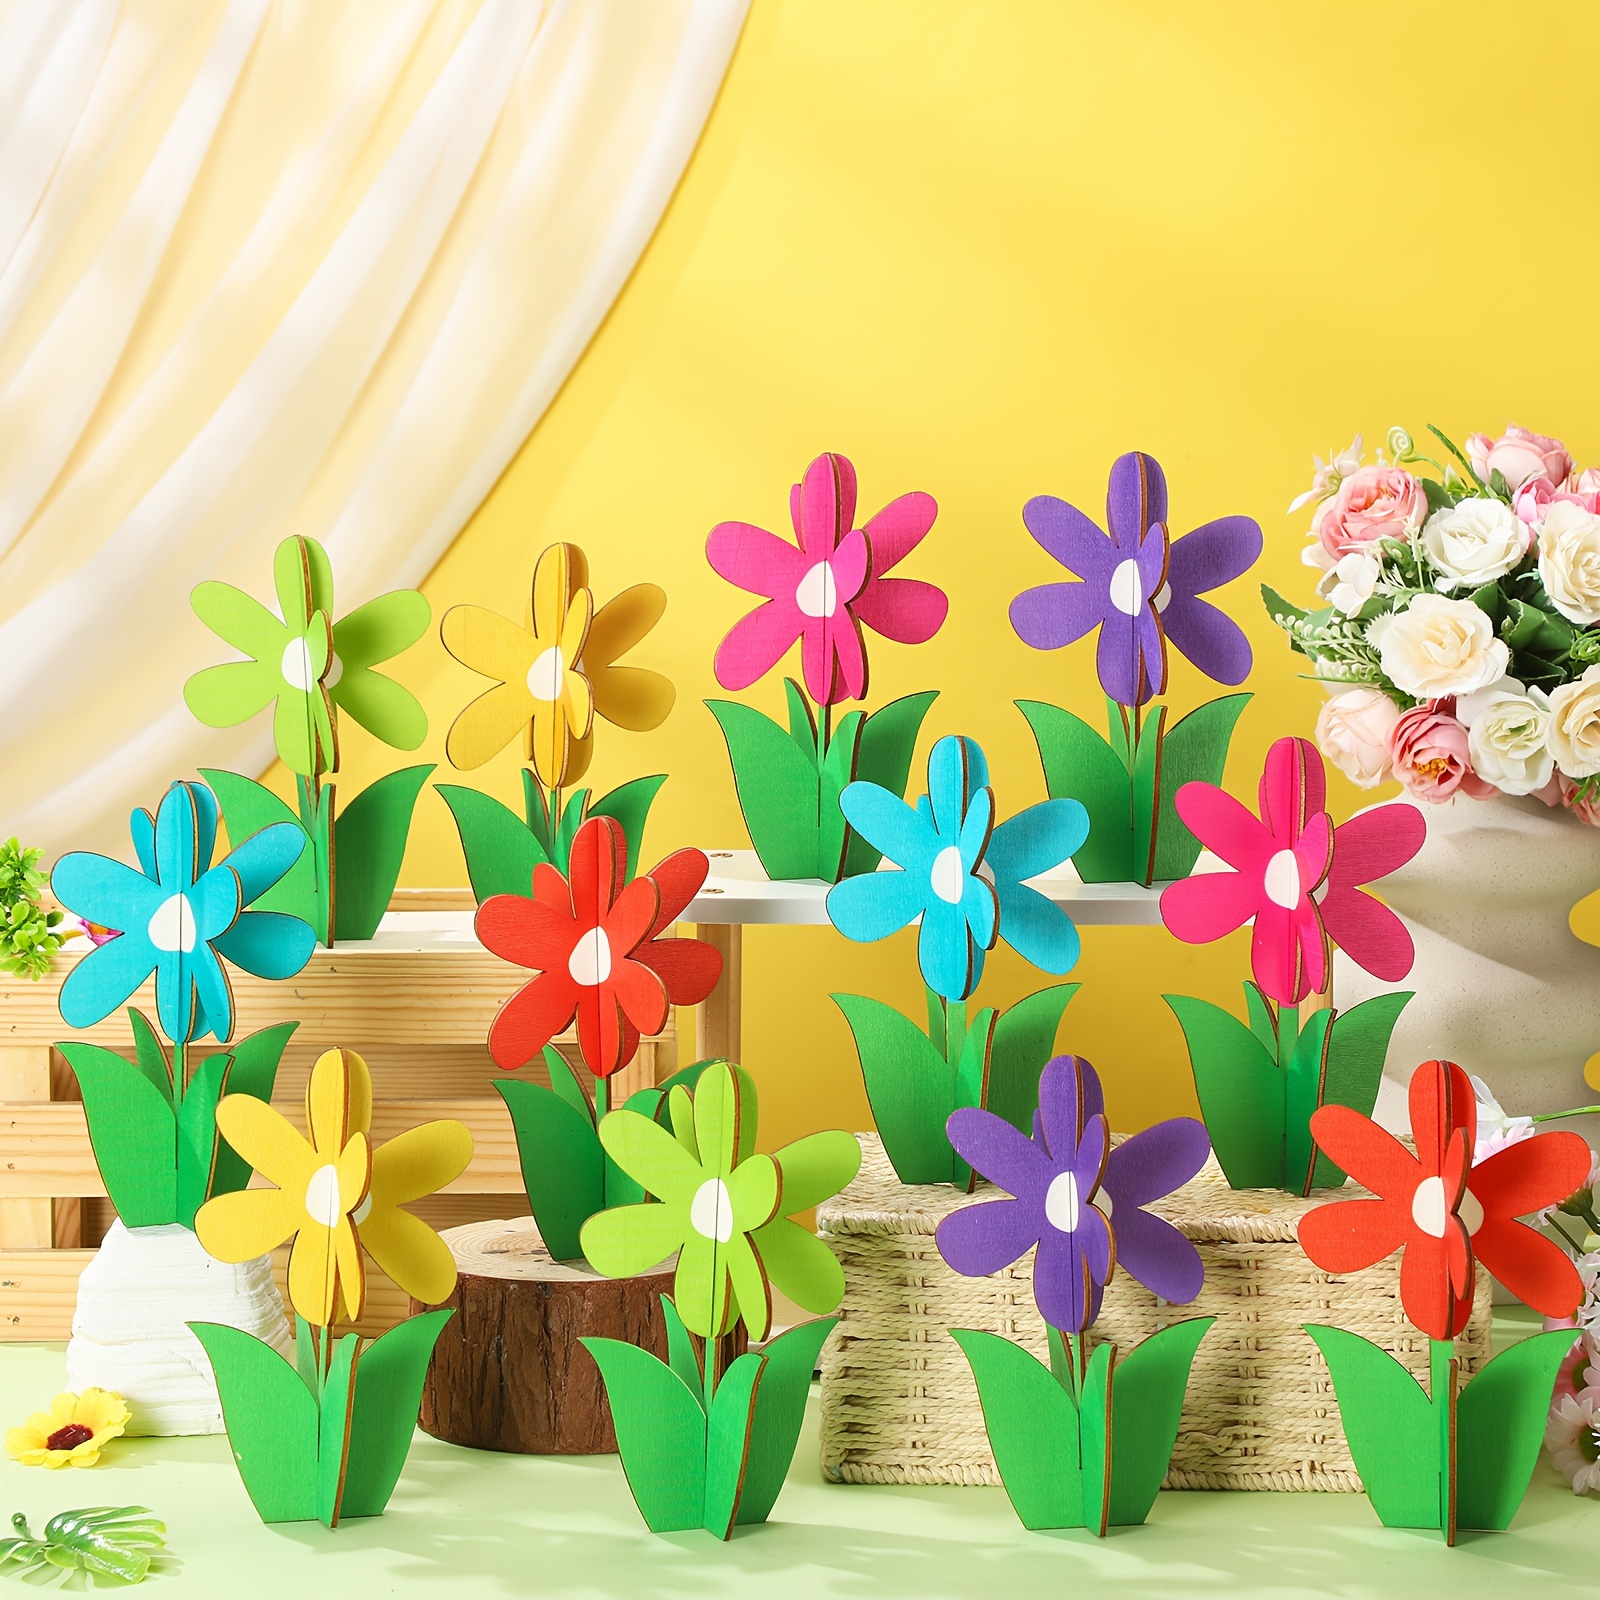 

24 Pcs Summer Flowers Wood Signs Retro 3d Flowers Table Decoration Rustic Farmhouse Flower Table Centerpiece Multicolor Flowers Floral Block Tabletop Signs For Tiered Decor(flower)